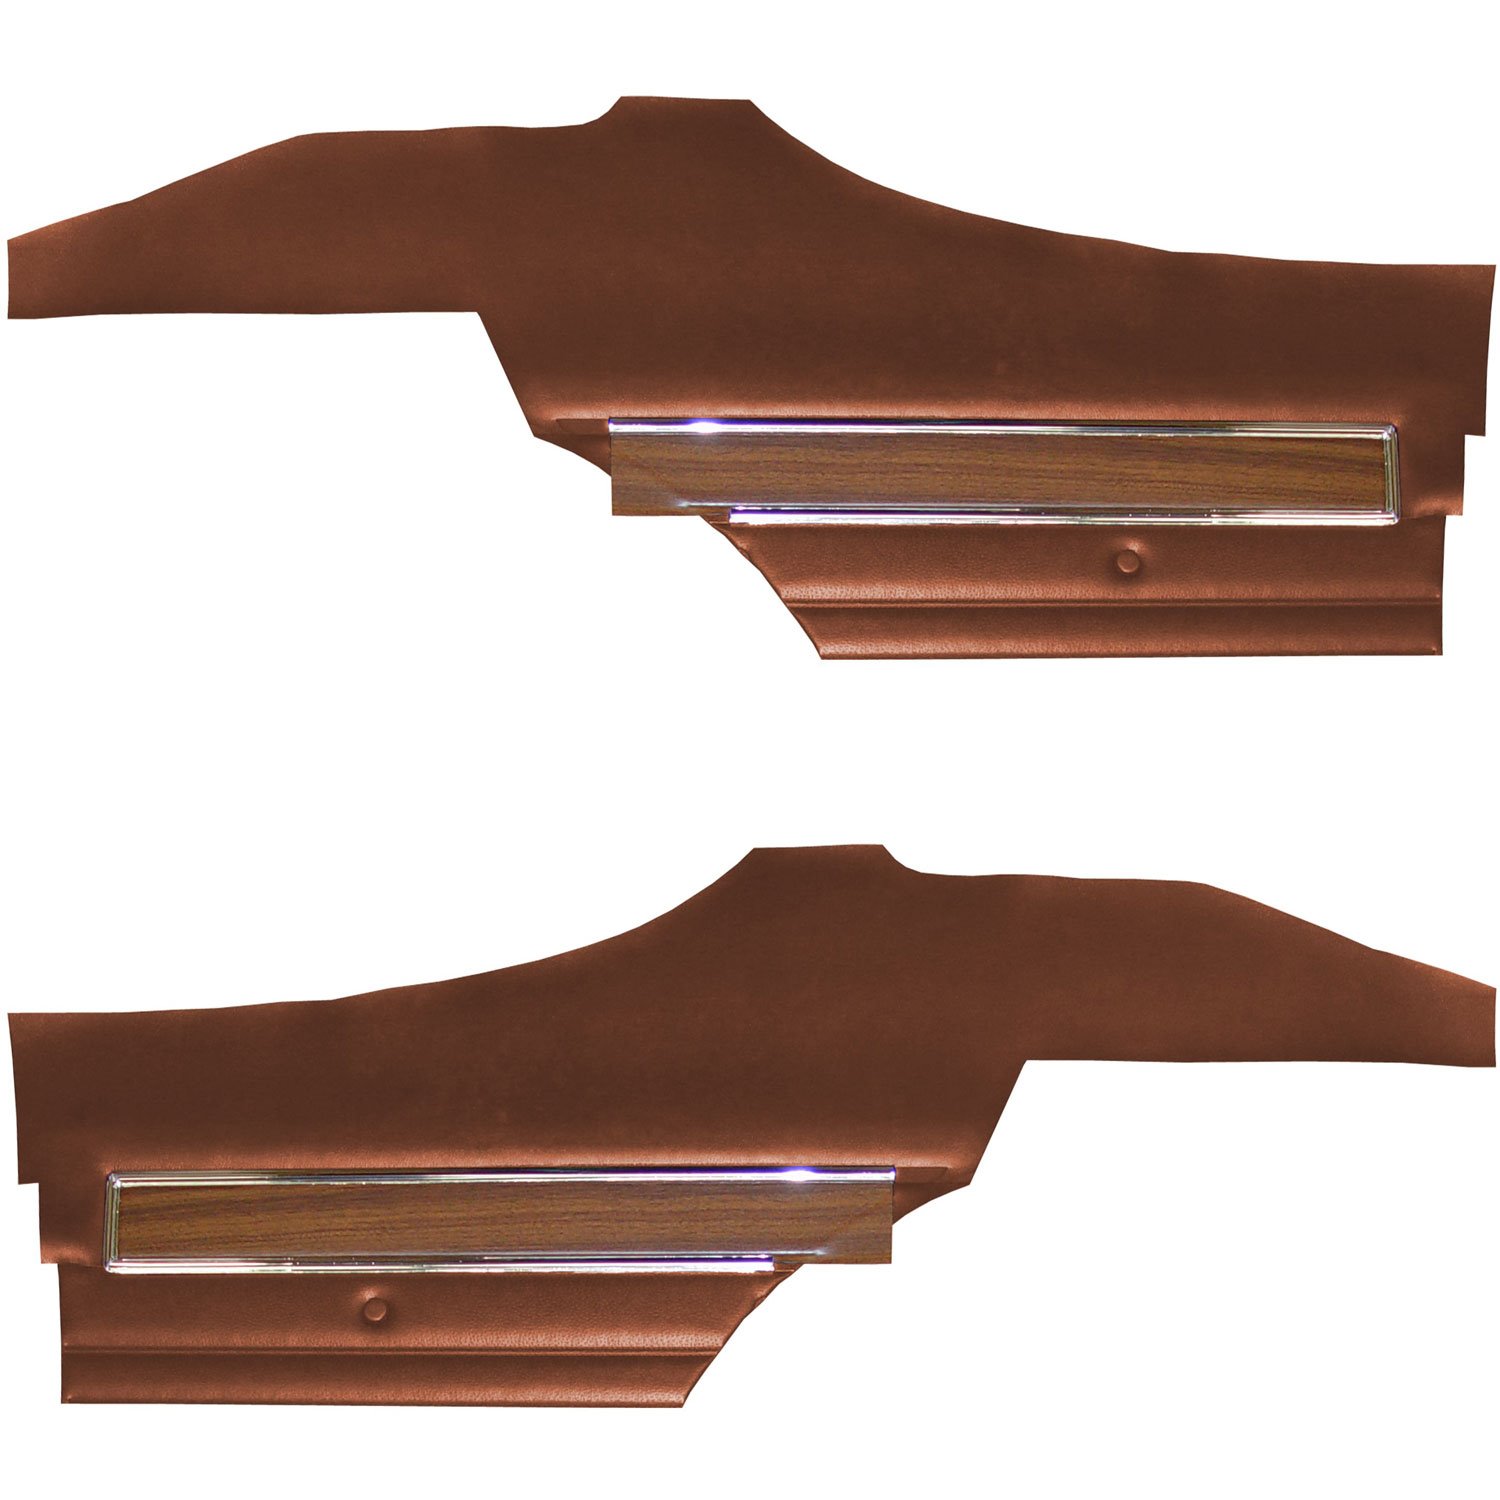 DO71GUS0048657G 71 CUTLASS S/442 HOLIDAY COUPE REAR PANELS - SIENNA